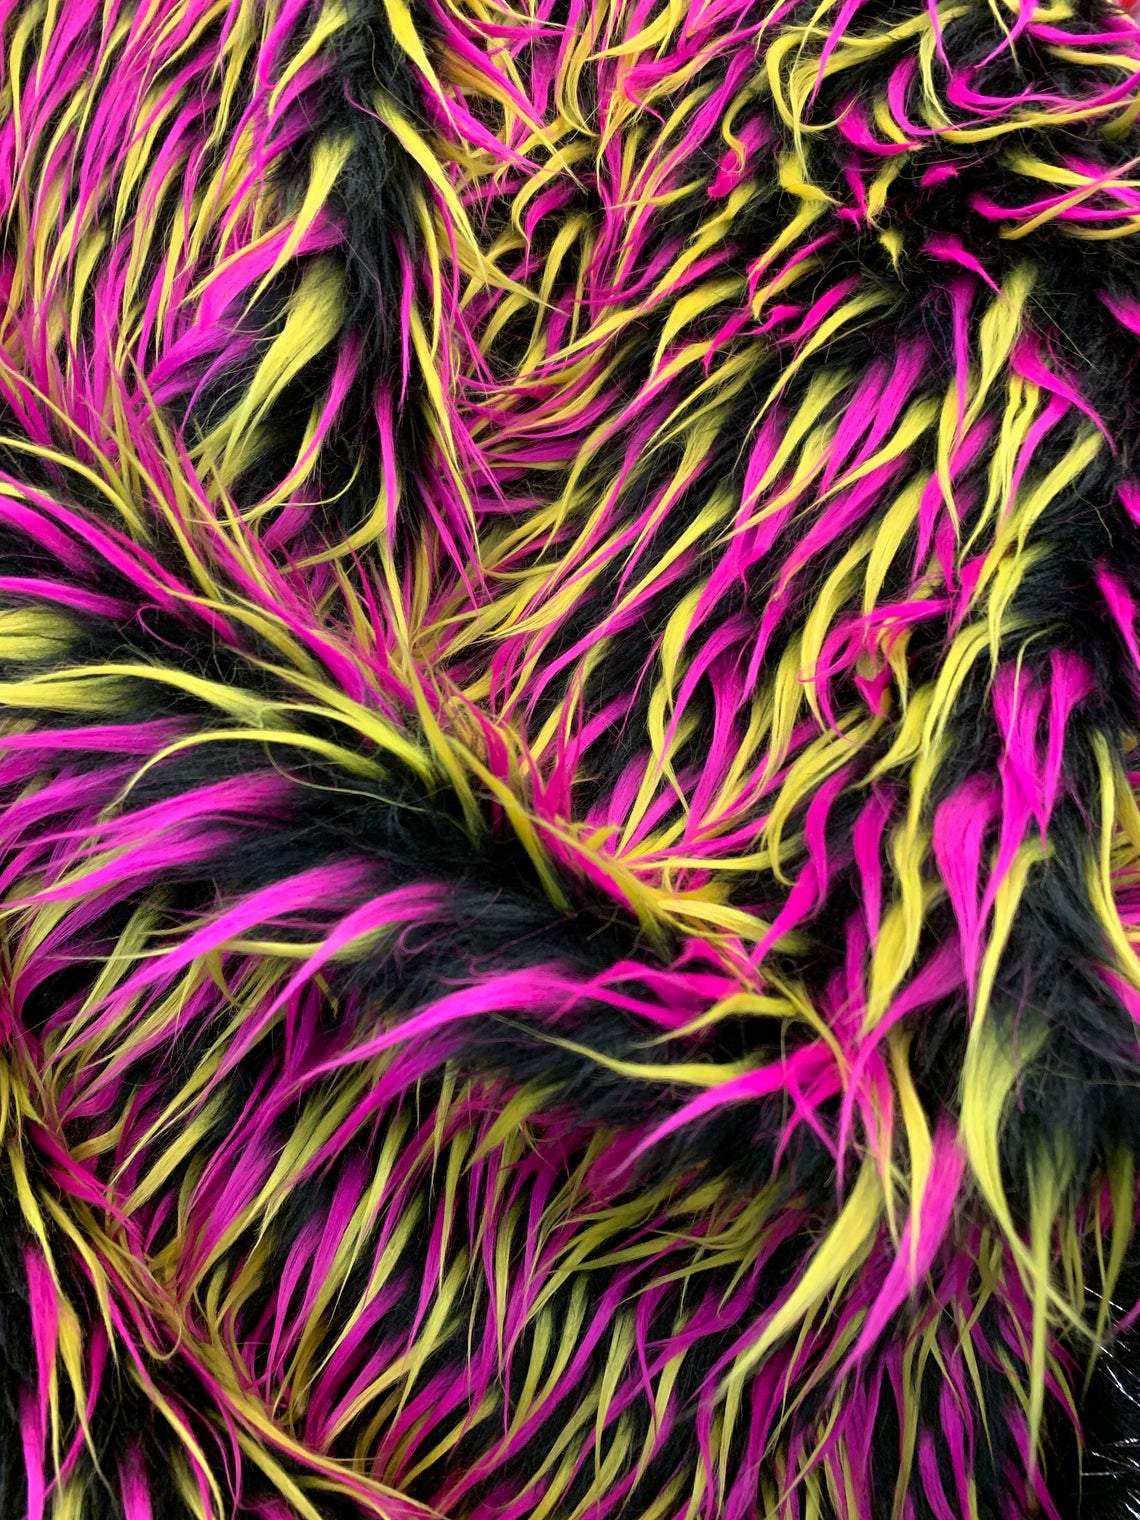 Yellow, Hot Pink, and Black Faux Fur Fabric By The Yard 3 Tone Fashion Fabric MaterialICE FABRICSICE FABRICSBy The Yard (60 inches Wide)Yellow, Hot Pink, and Black Faux Fur Fabric By The Yard 3 Tone Fashion Fabric Material ICE FABRICS